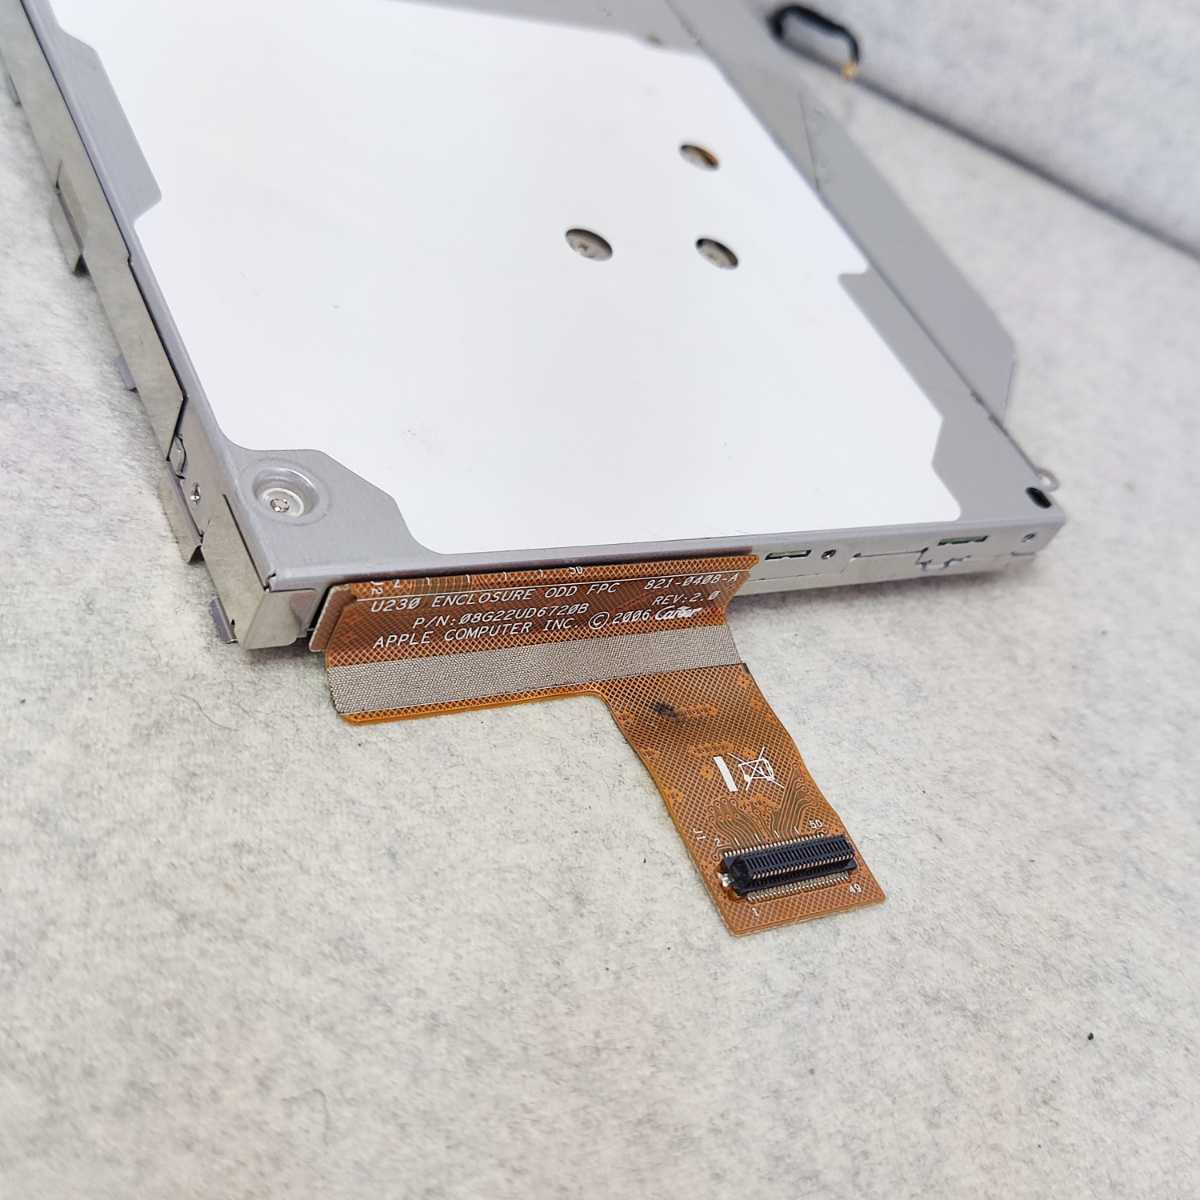  special delivery carriage less MacBook A1181 13 -inch Late 2006/Mid 2007/Early 2008 etc. for slot in type DVD Drive Panasonic UJ-857C IDE * Y033D